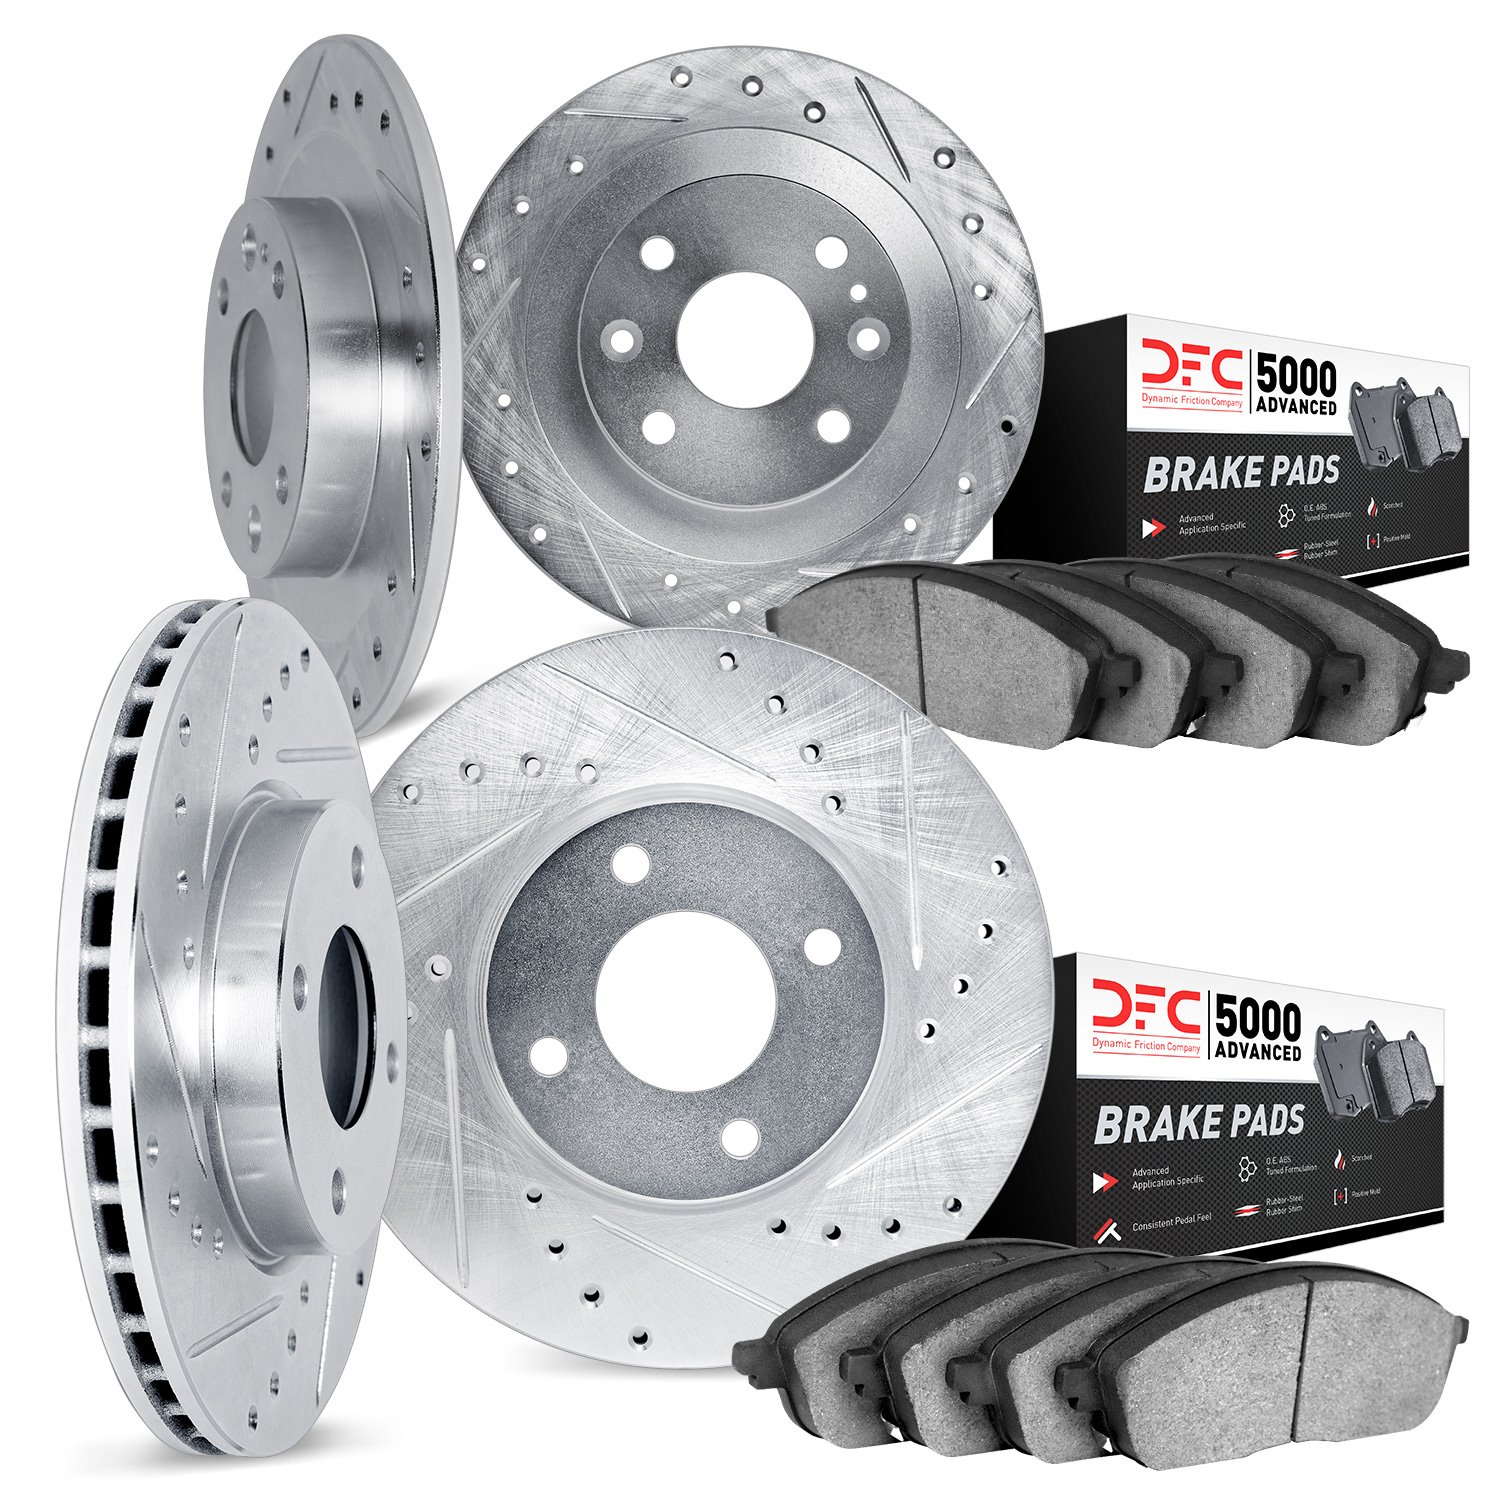 7504-37005 Drilled/Slotted Brake Rotors w/5000 Advanced Brake Pads Kit [Silver], 1989-1993 GM, Position: Front and Rear